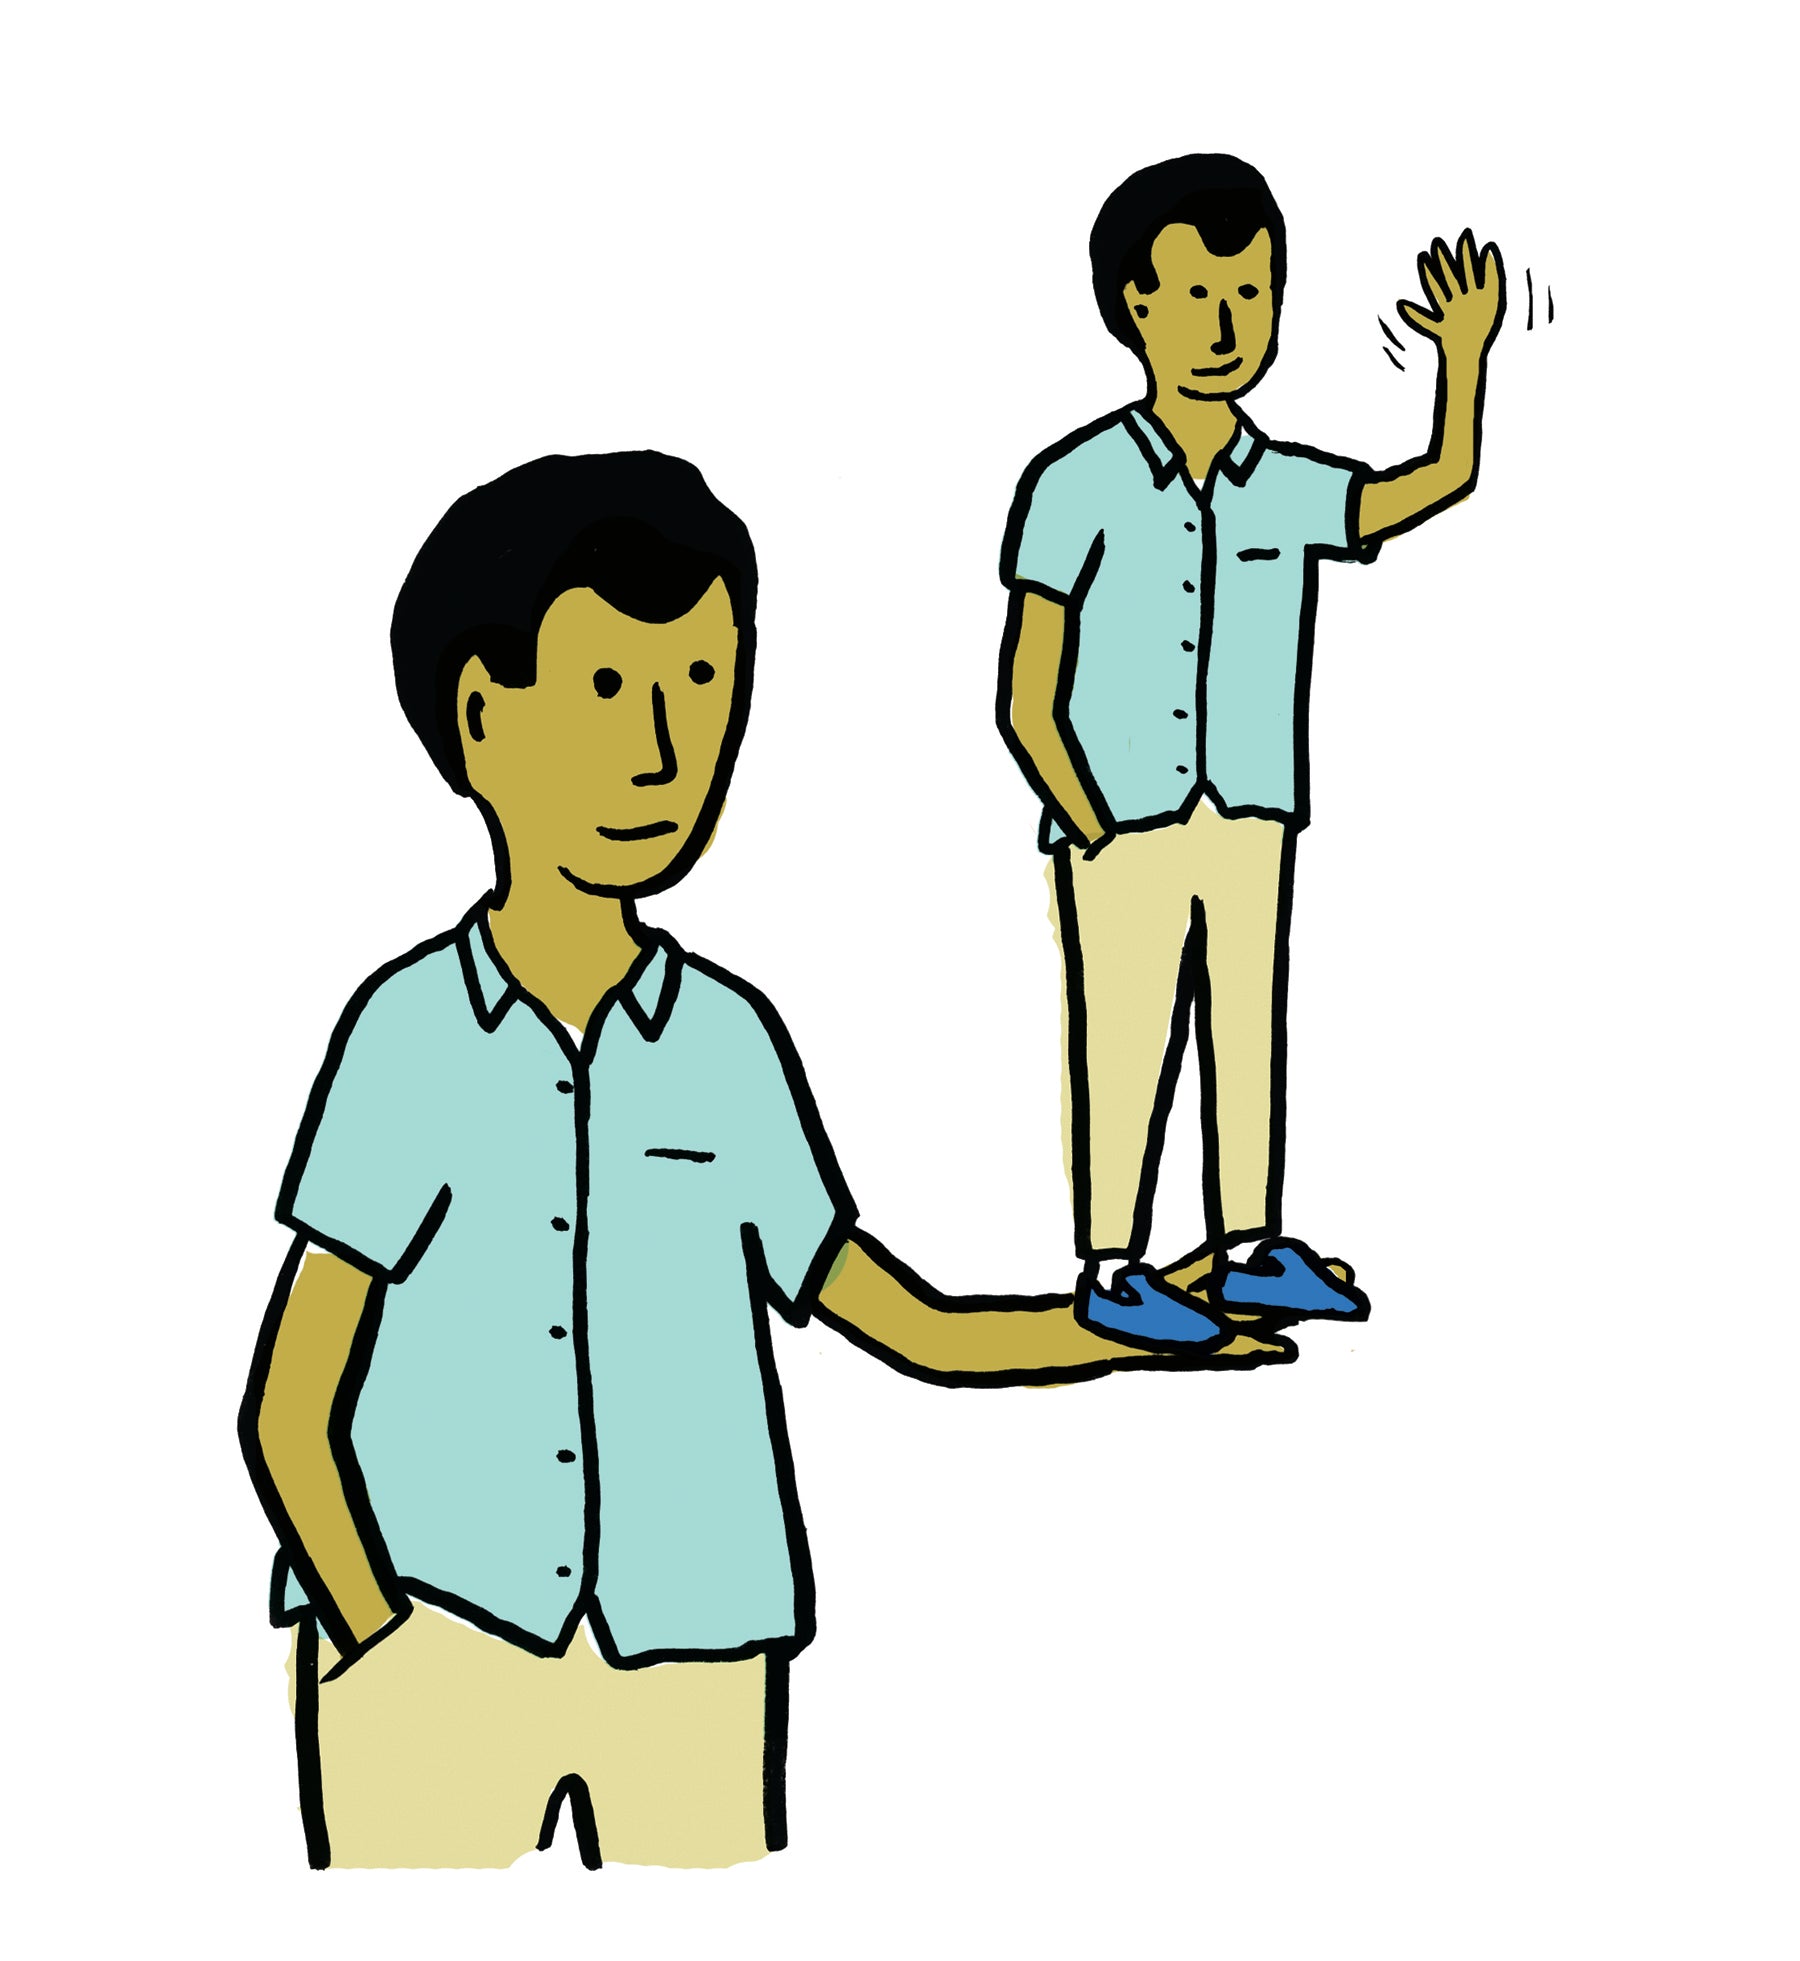 Illustration of a young ethnically ambiguous man holding a mini version of himself, as a metaphor for introducing himself. 